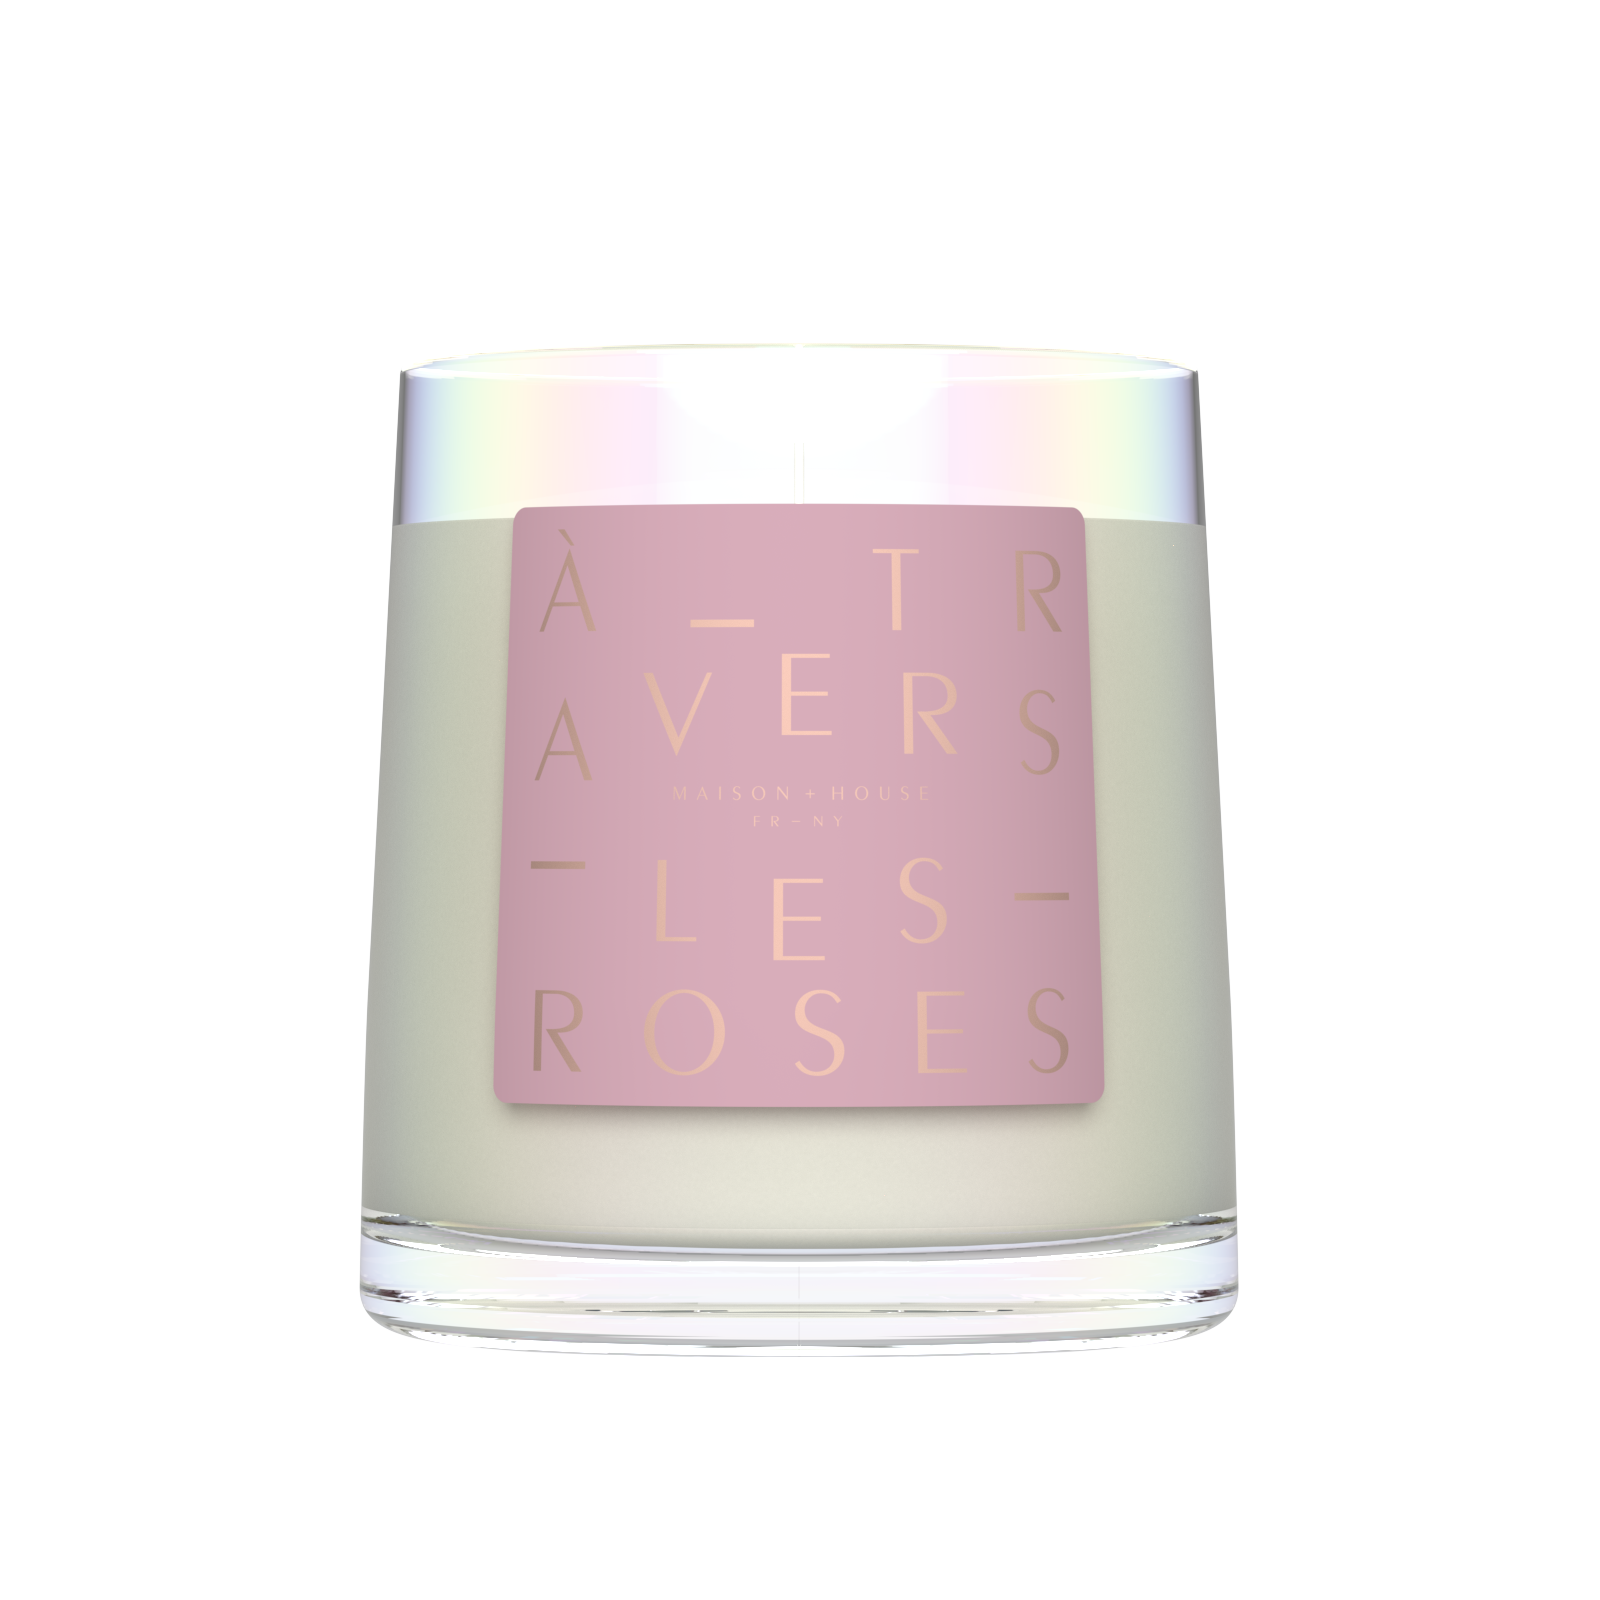 Through the Roses Artisanal French-Fragrance Candle